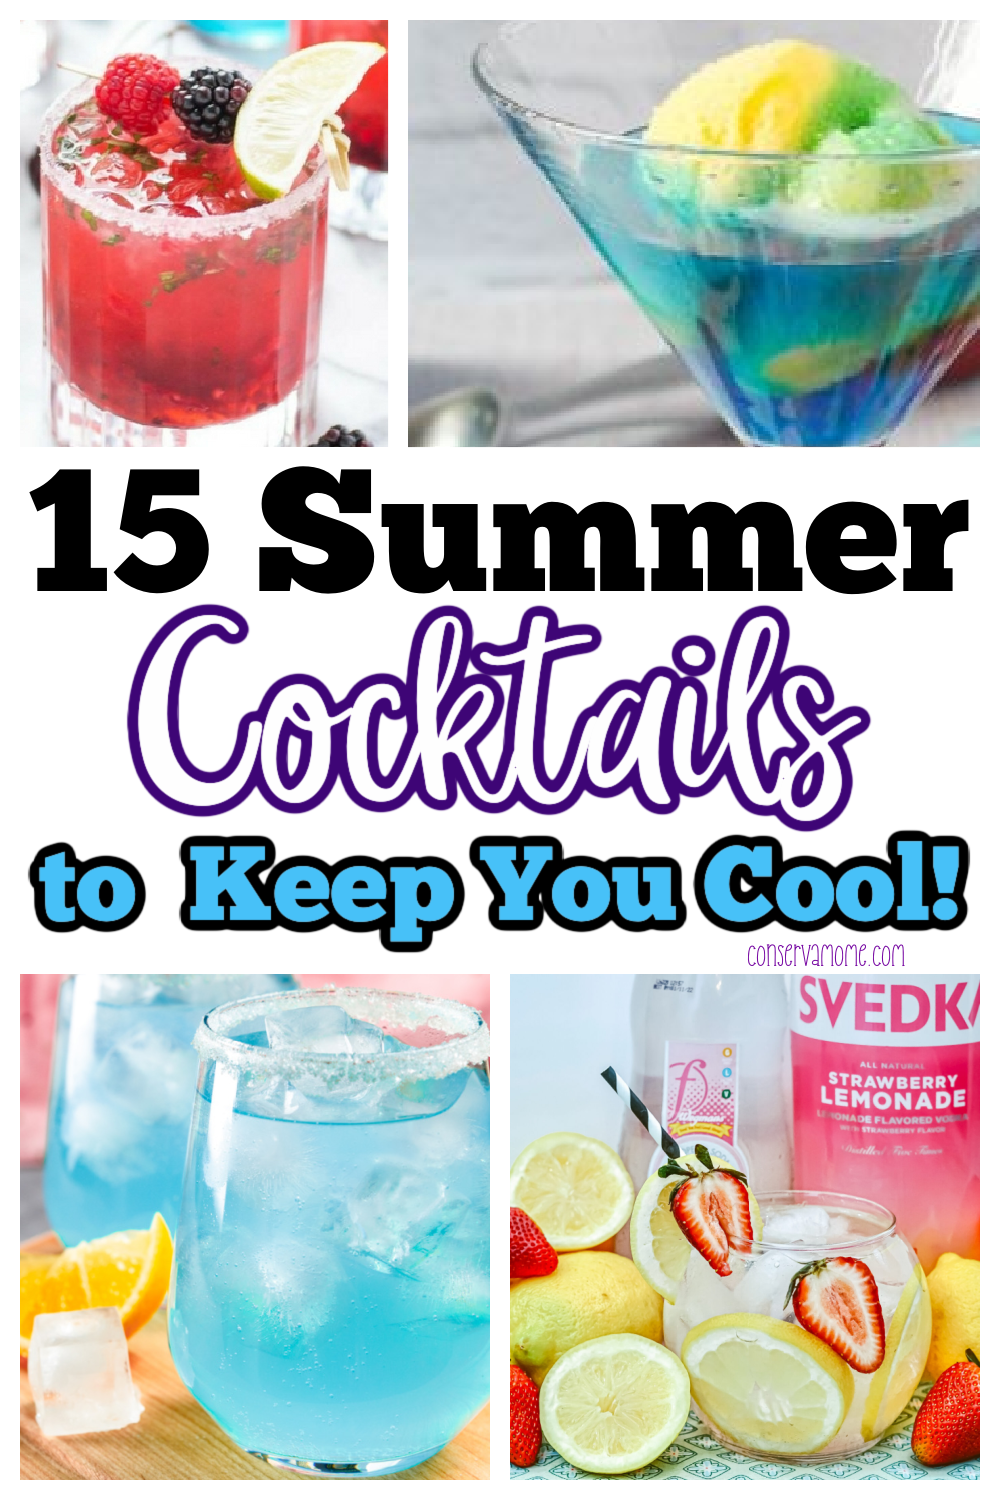 15 summer cocktails to keep you cool